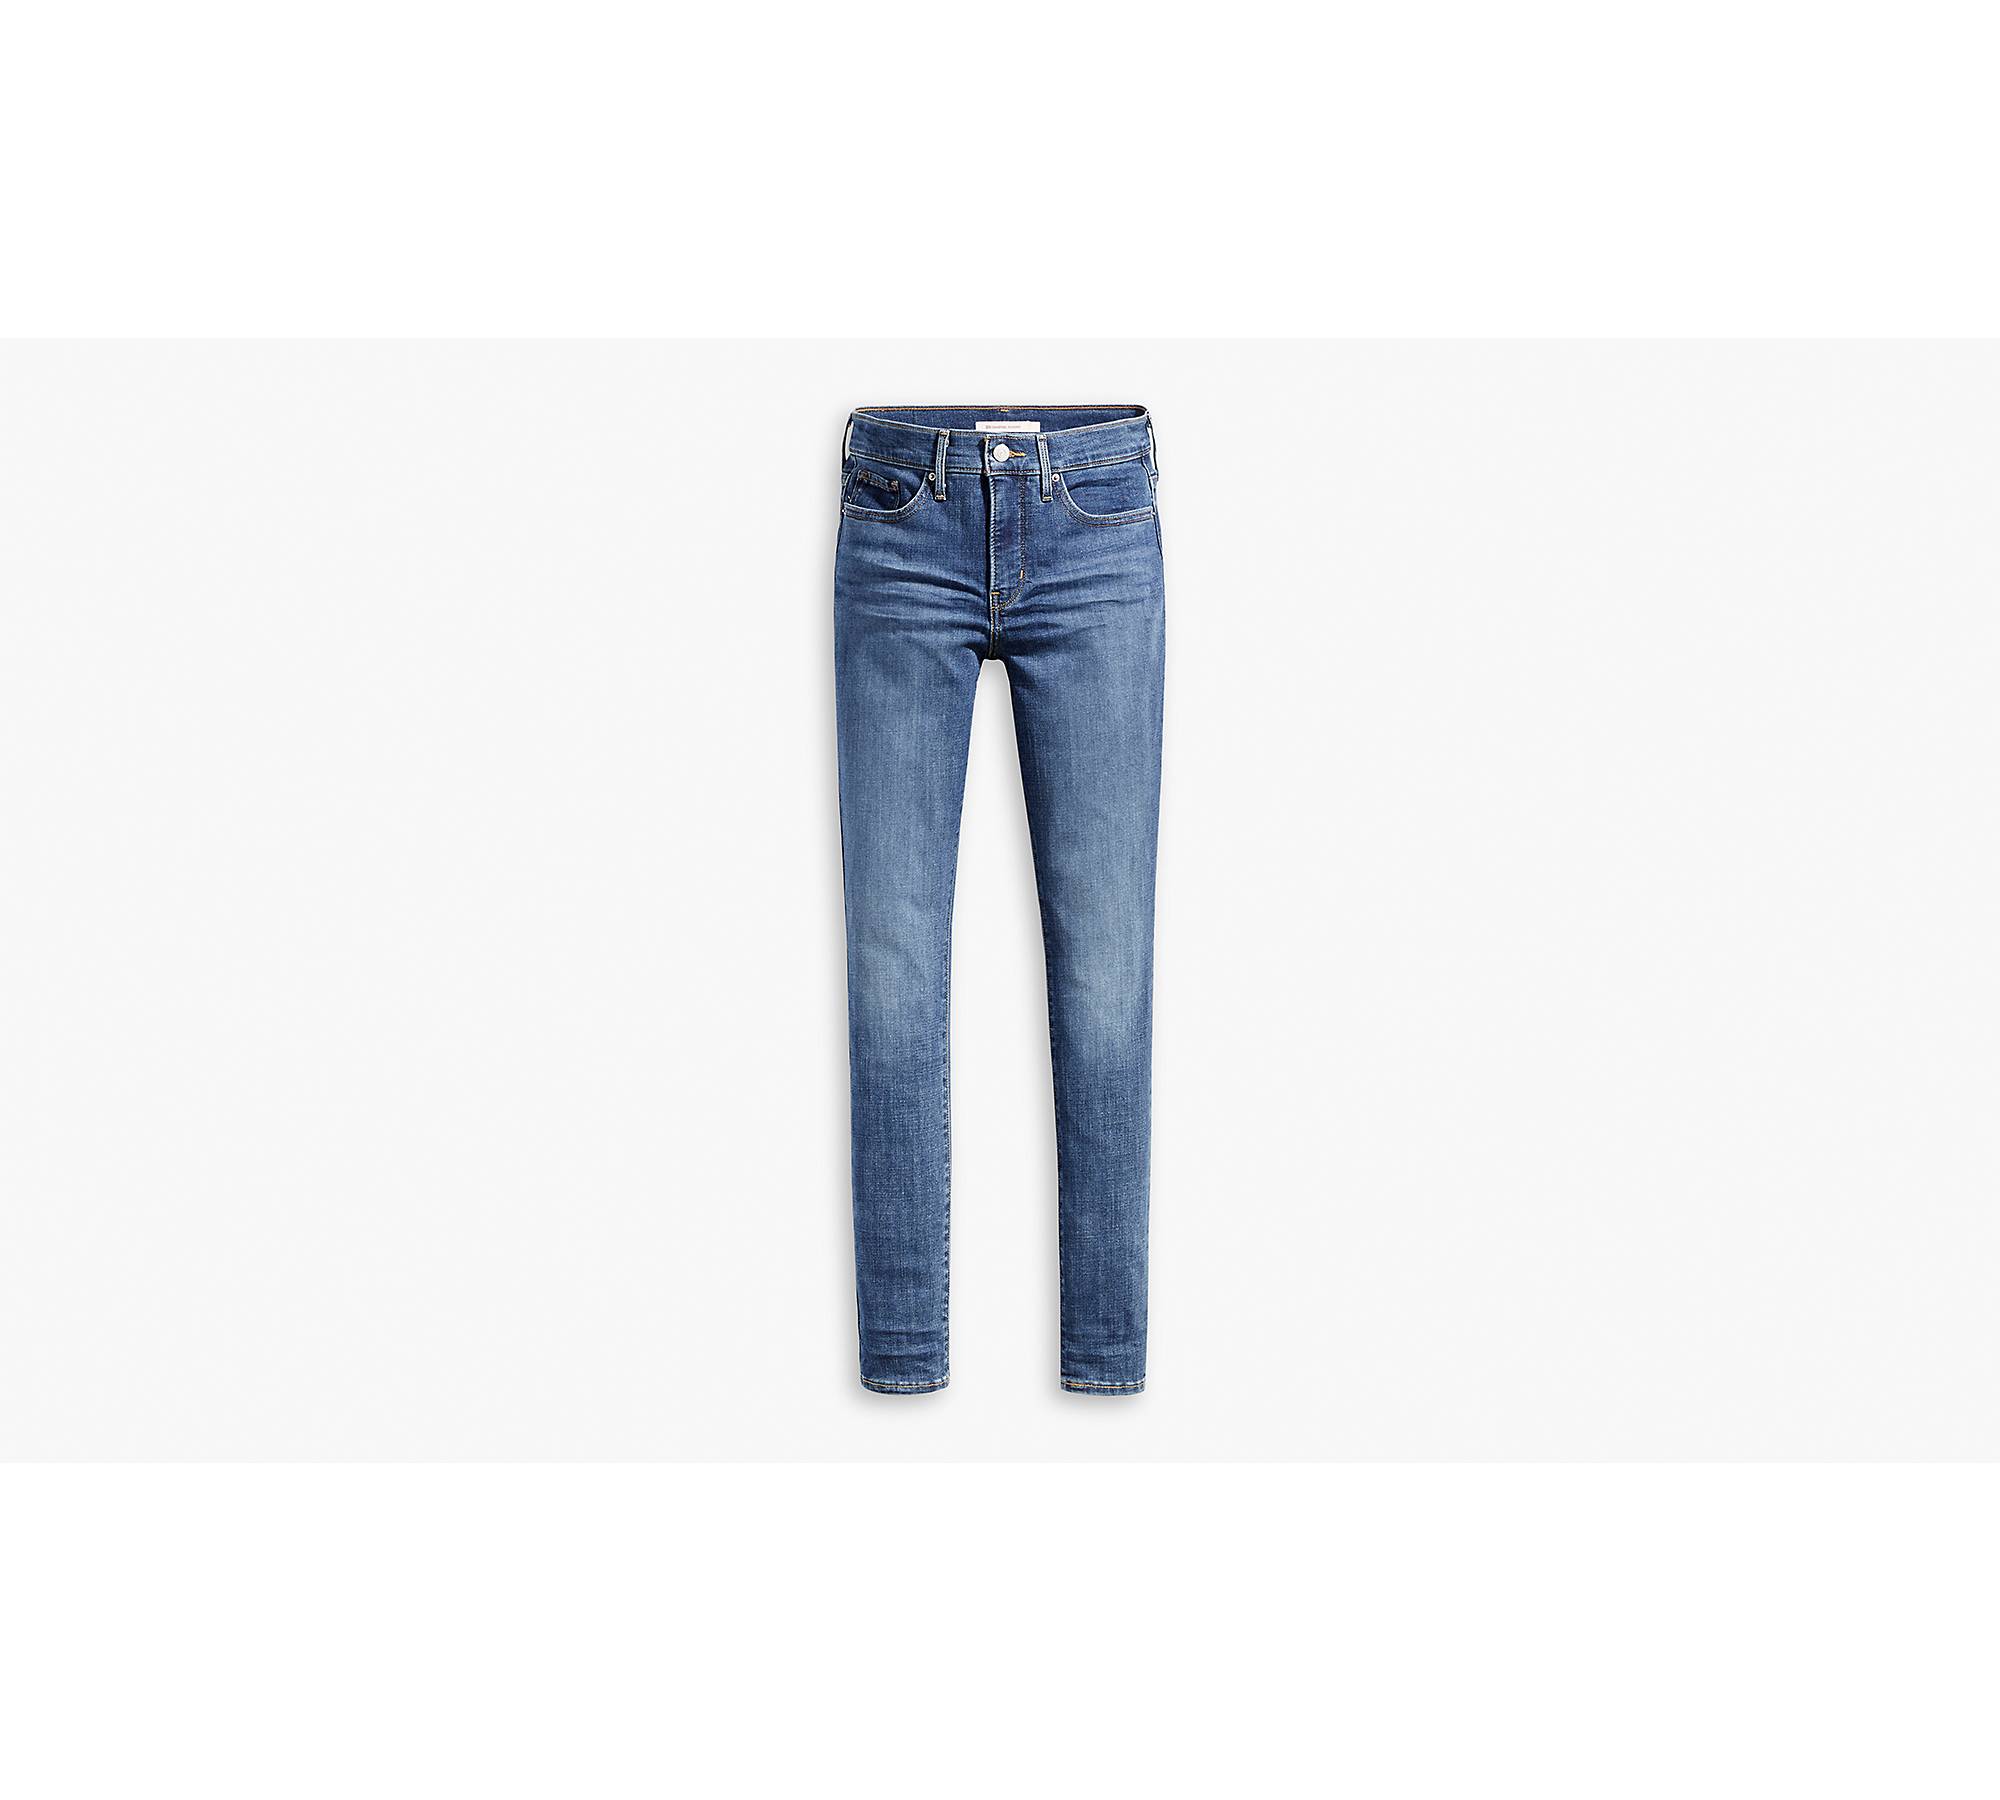 Exposed Button 311 Shaping Ankle Skinny Women's Jeans - Medium Wash